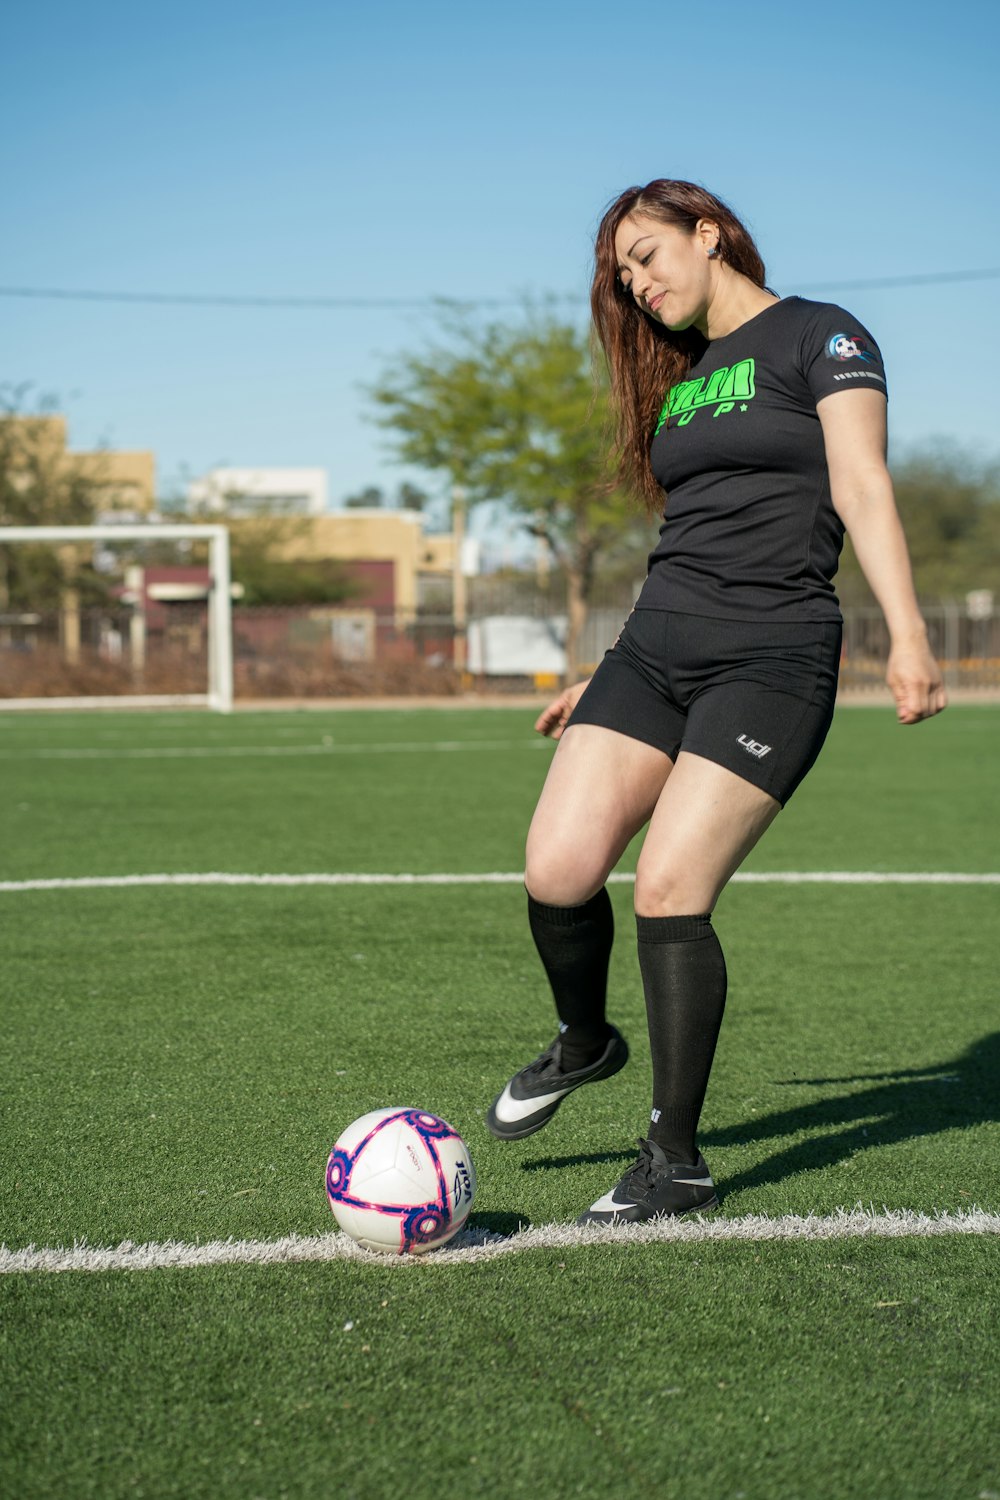 woman in black and white nike soccer jersey kicking soccer ball on green grass field during